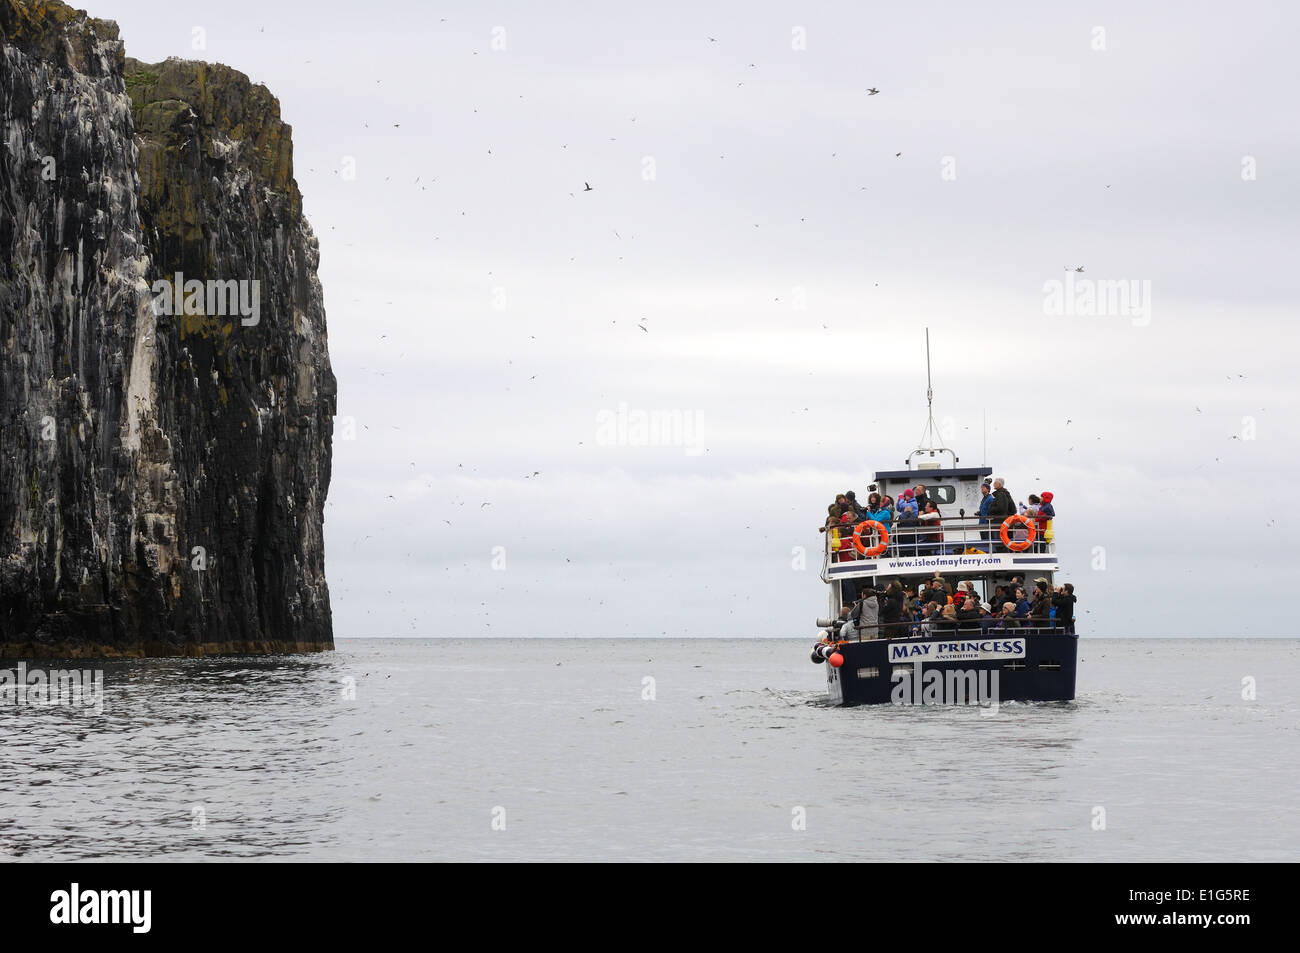 The 'May Princess' circumnavigates the Isle of May with passengers viewing the nesting sea birds on the steep cliffs. Stock Photo